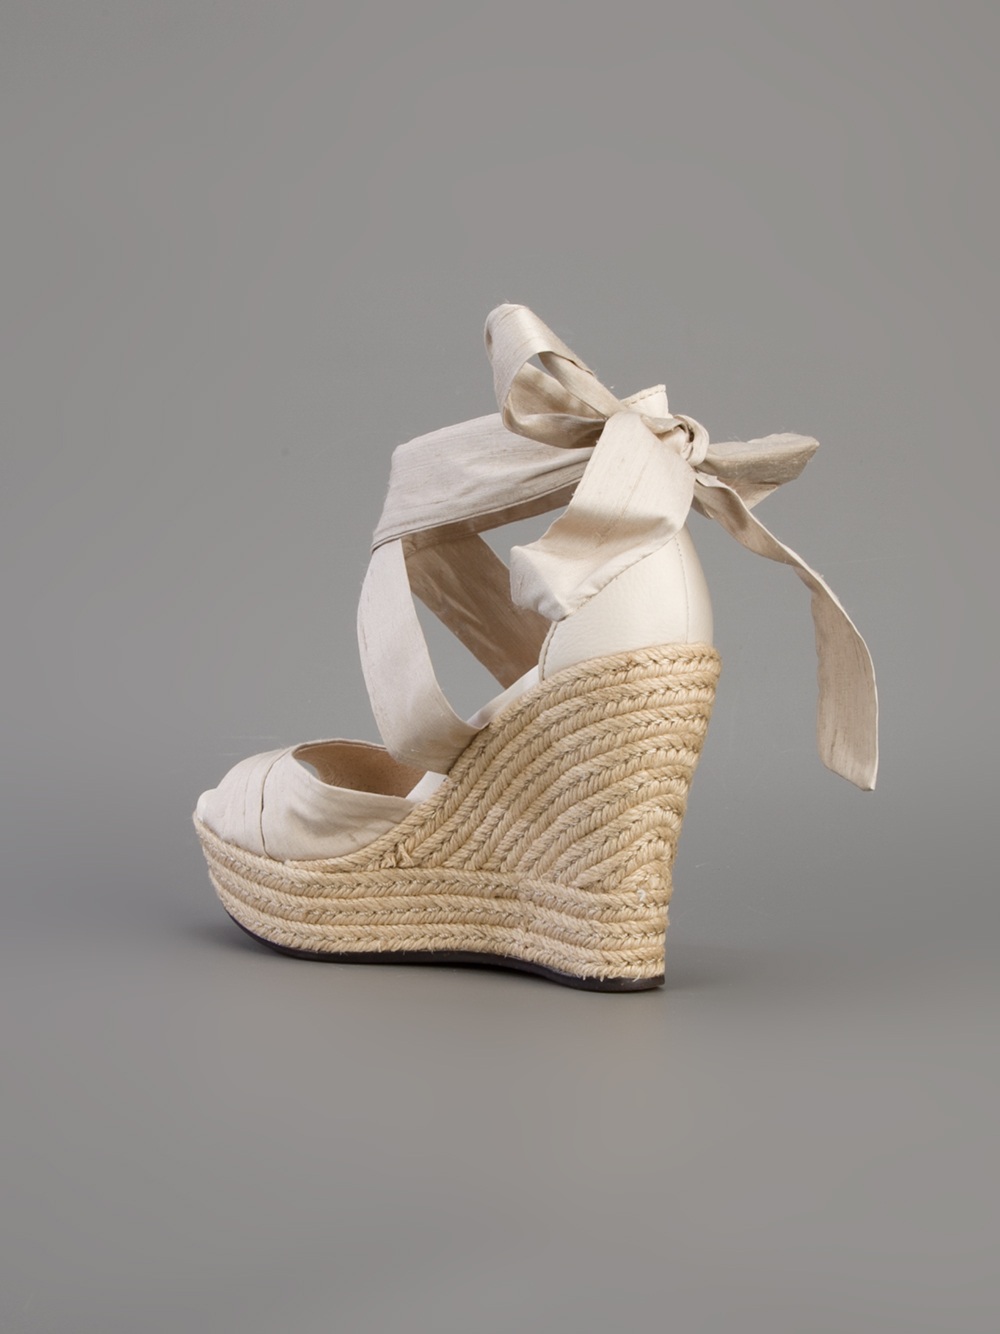 UGG Lucianna Wedge Sandal in Champagne (Metallic) | Lyst